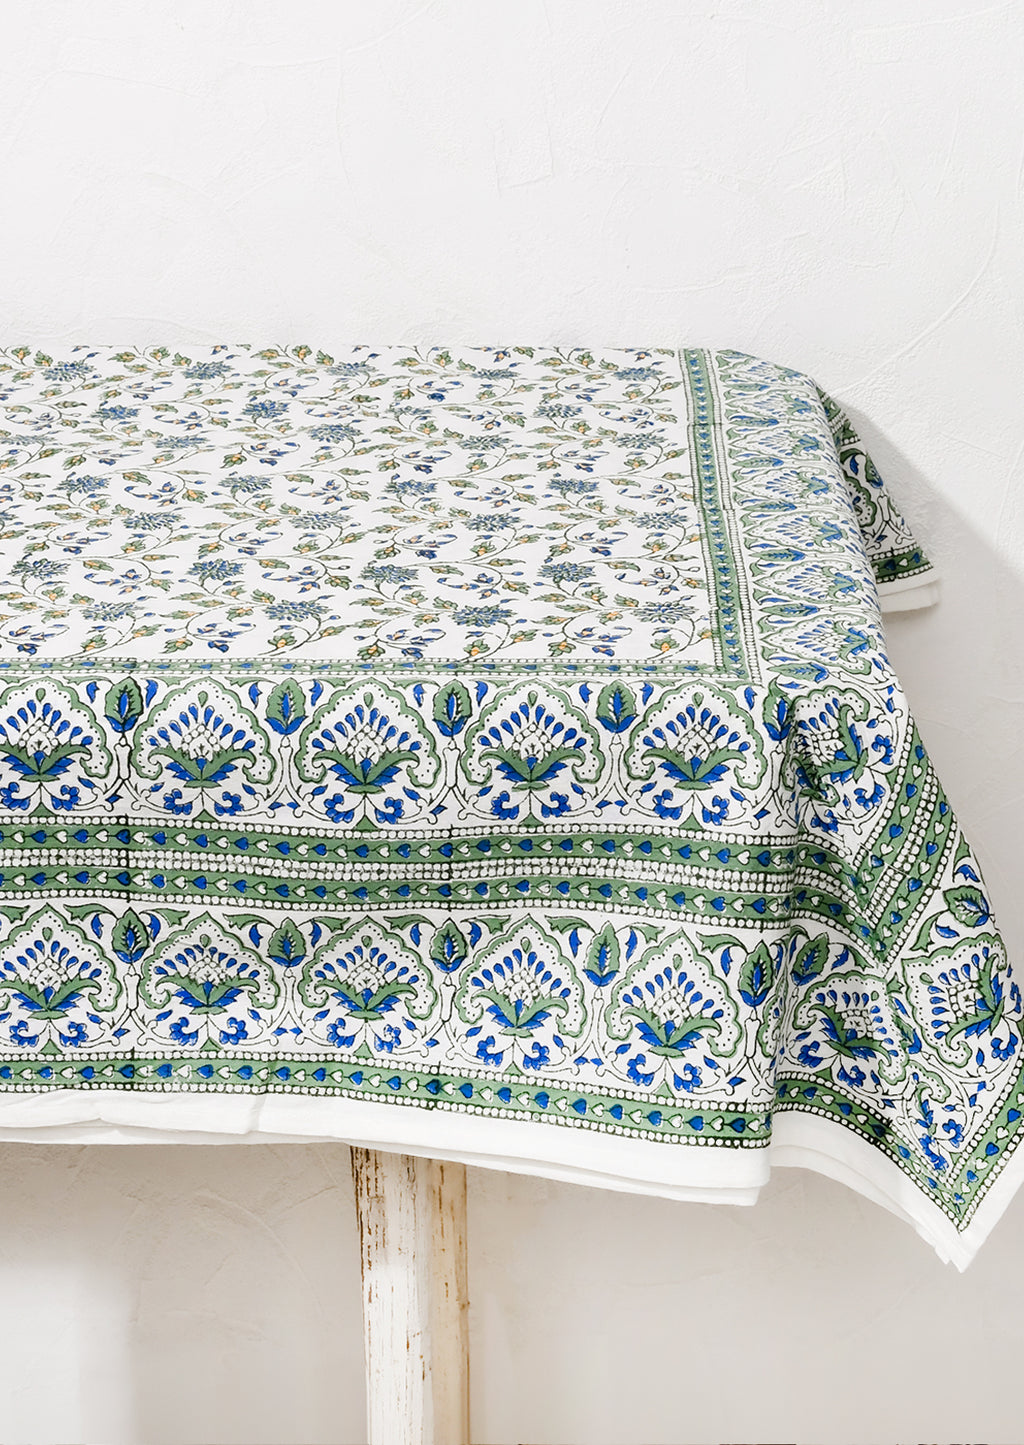 2: A block printed tablecloth in blue and green floral.